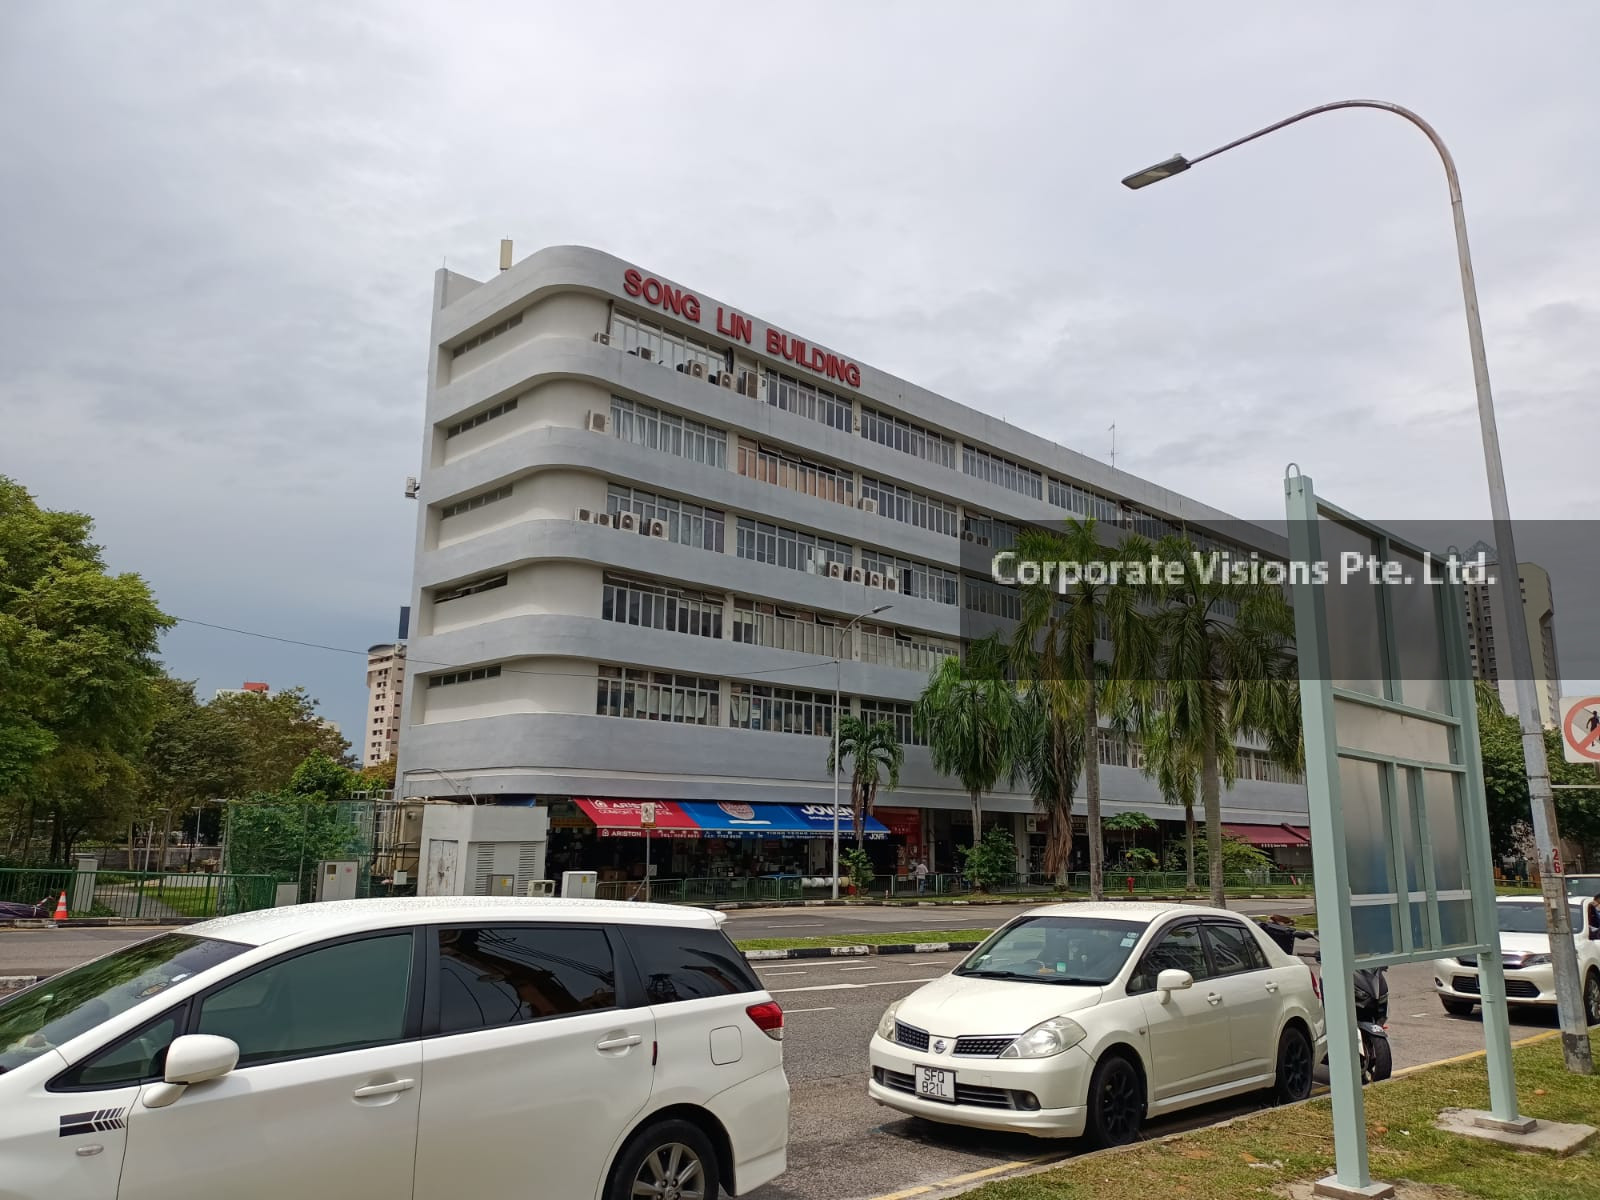 Song Lin Building - 1 Syed Alwi Road, Singapore 207628, Song Lin Building &#8211; 1 Syed Alwi Road, Singapore 207628